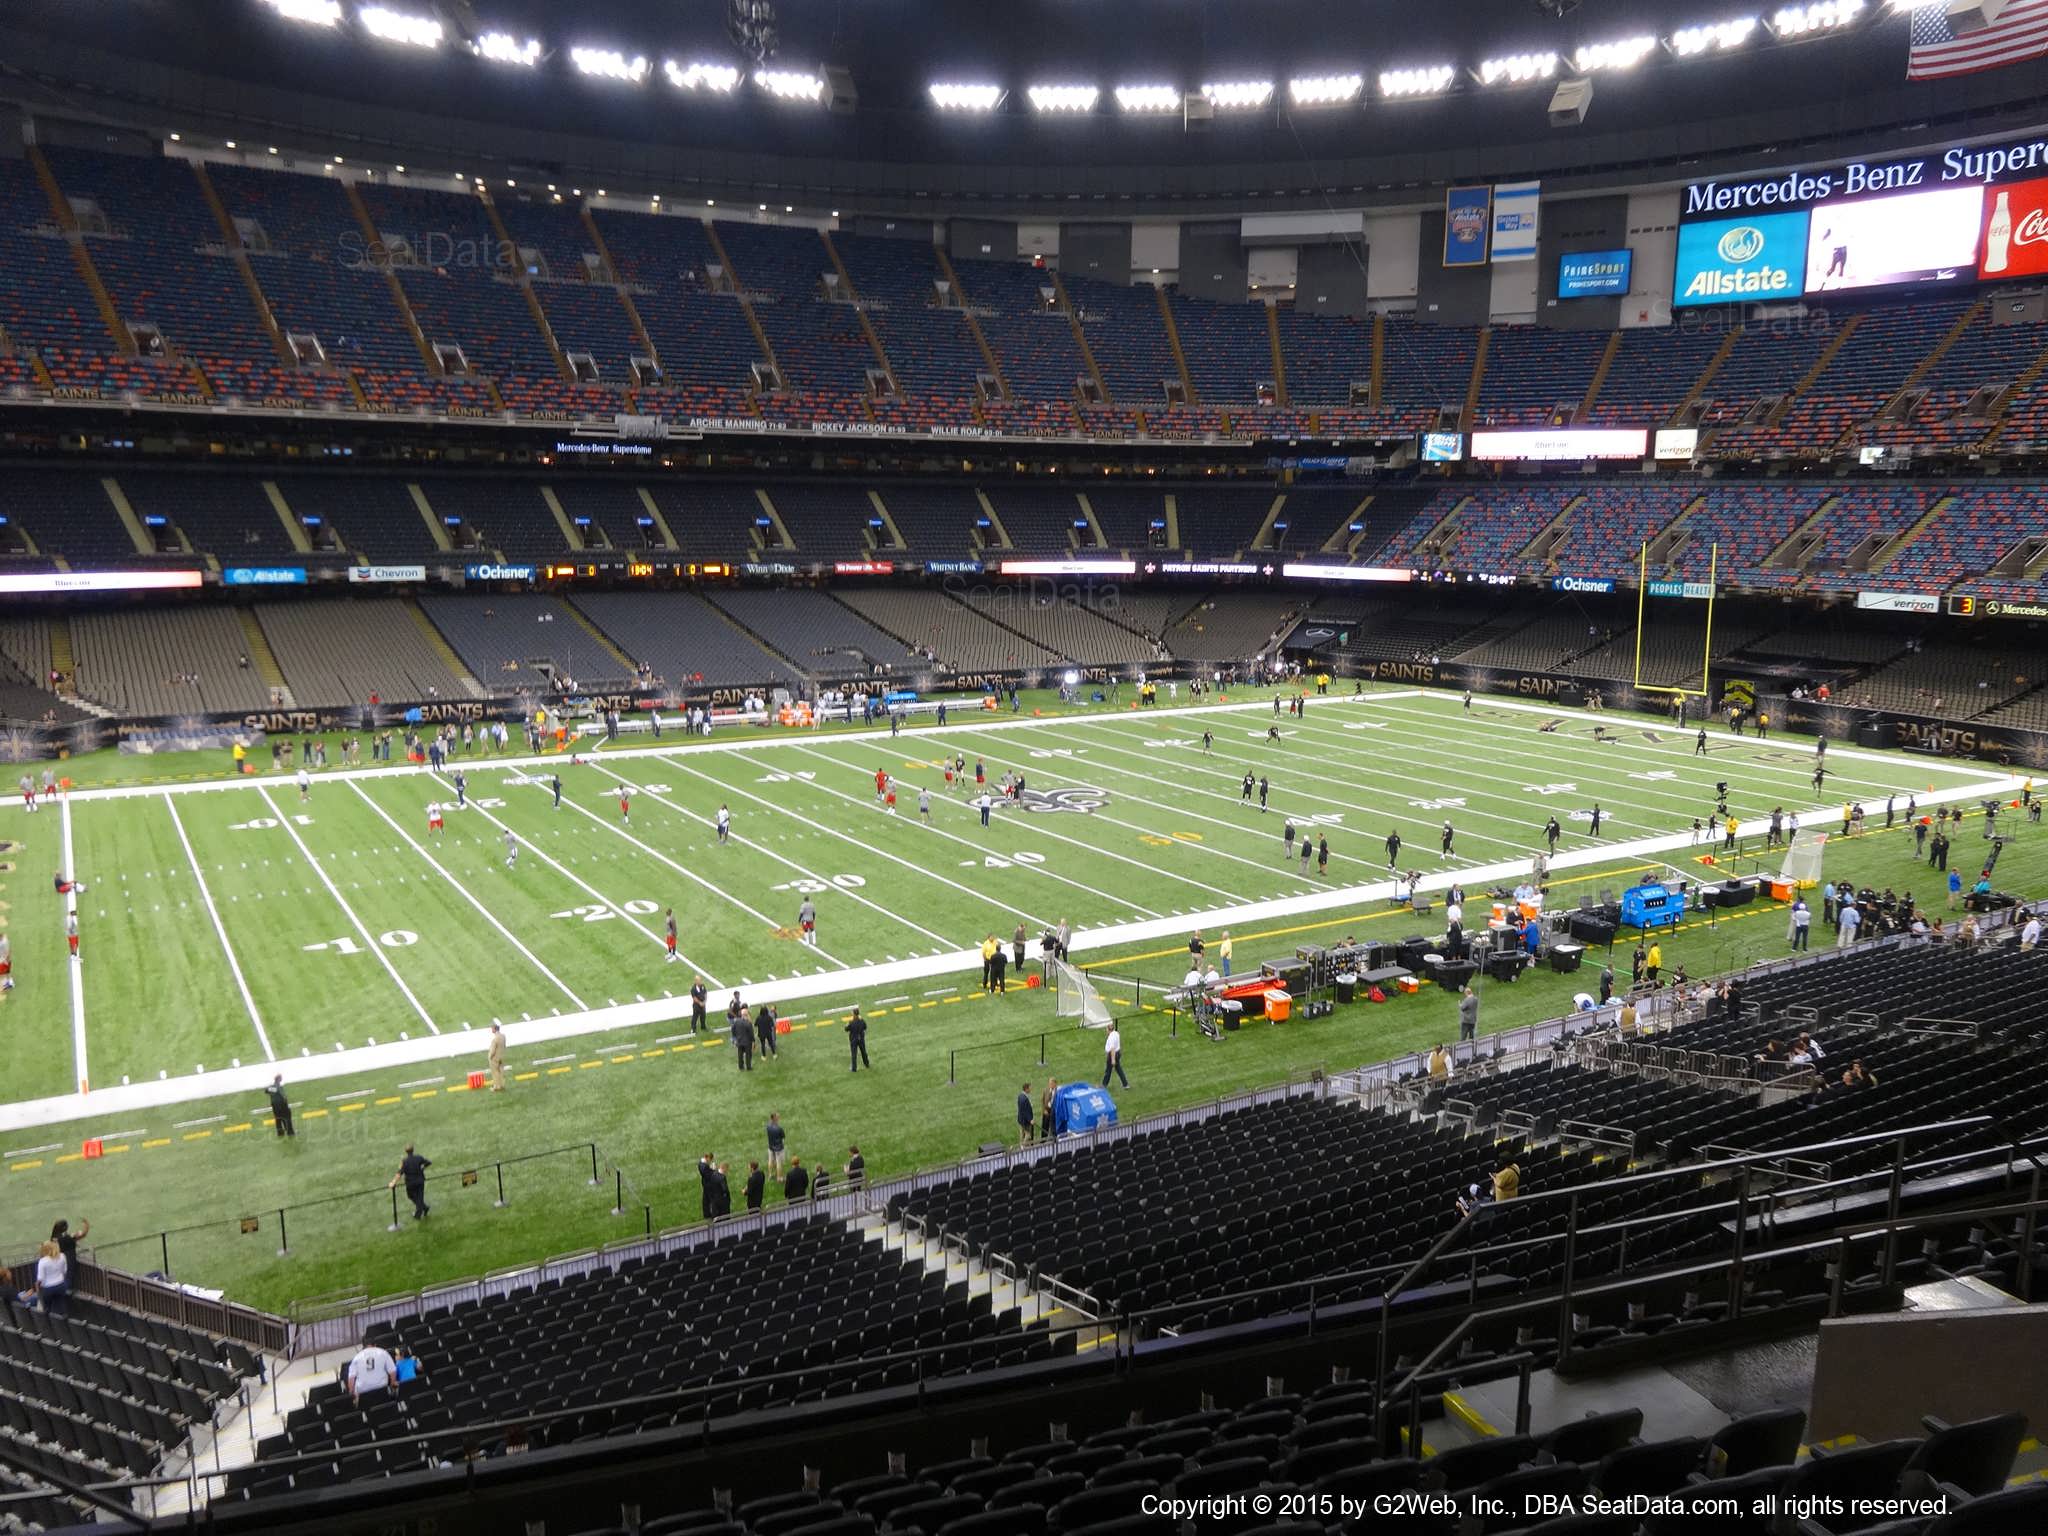 Seat view from section 340 at the Mercedes-Benz Superdome, home of the New Orleans Saints